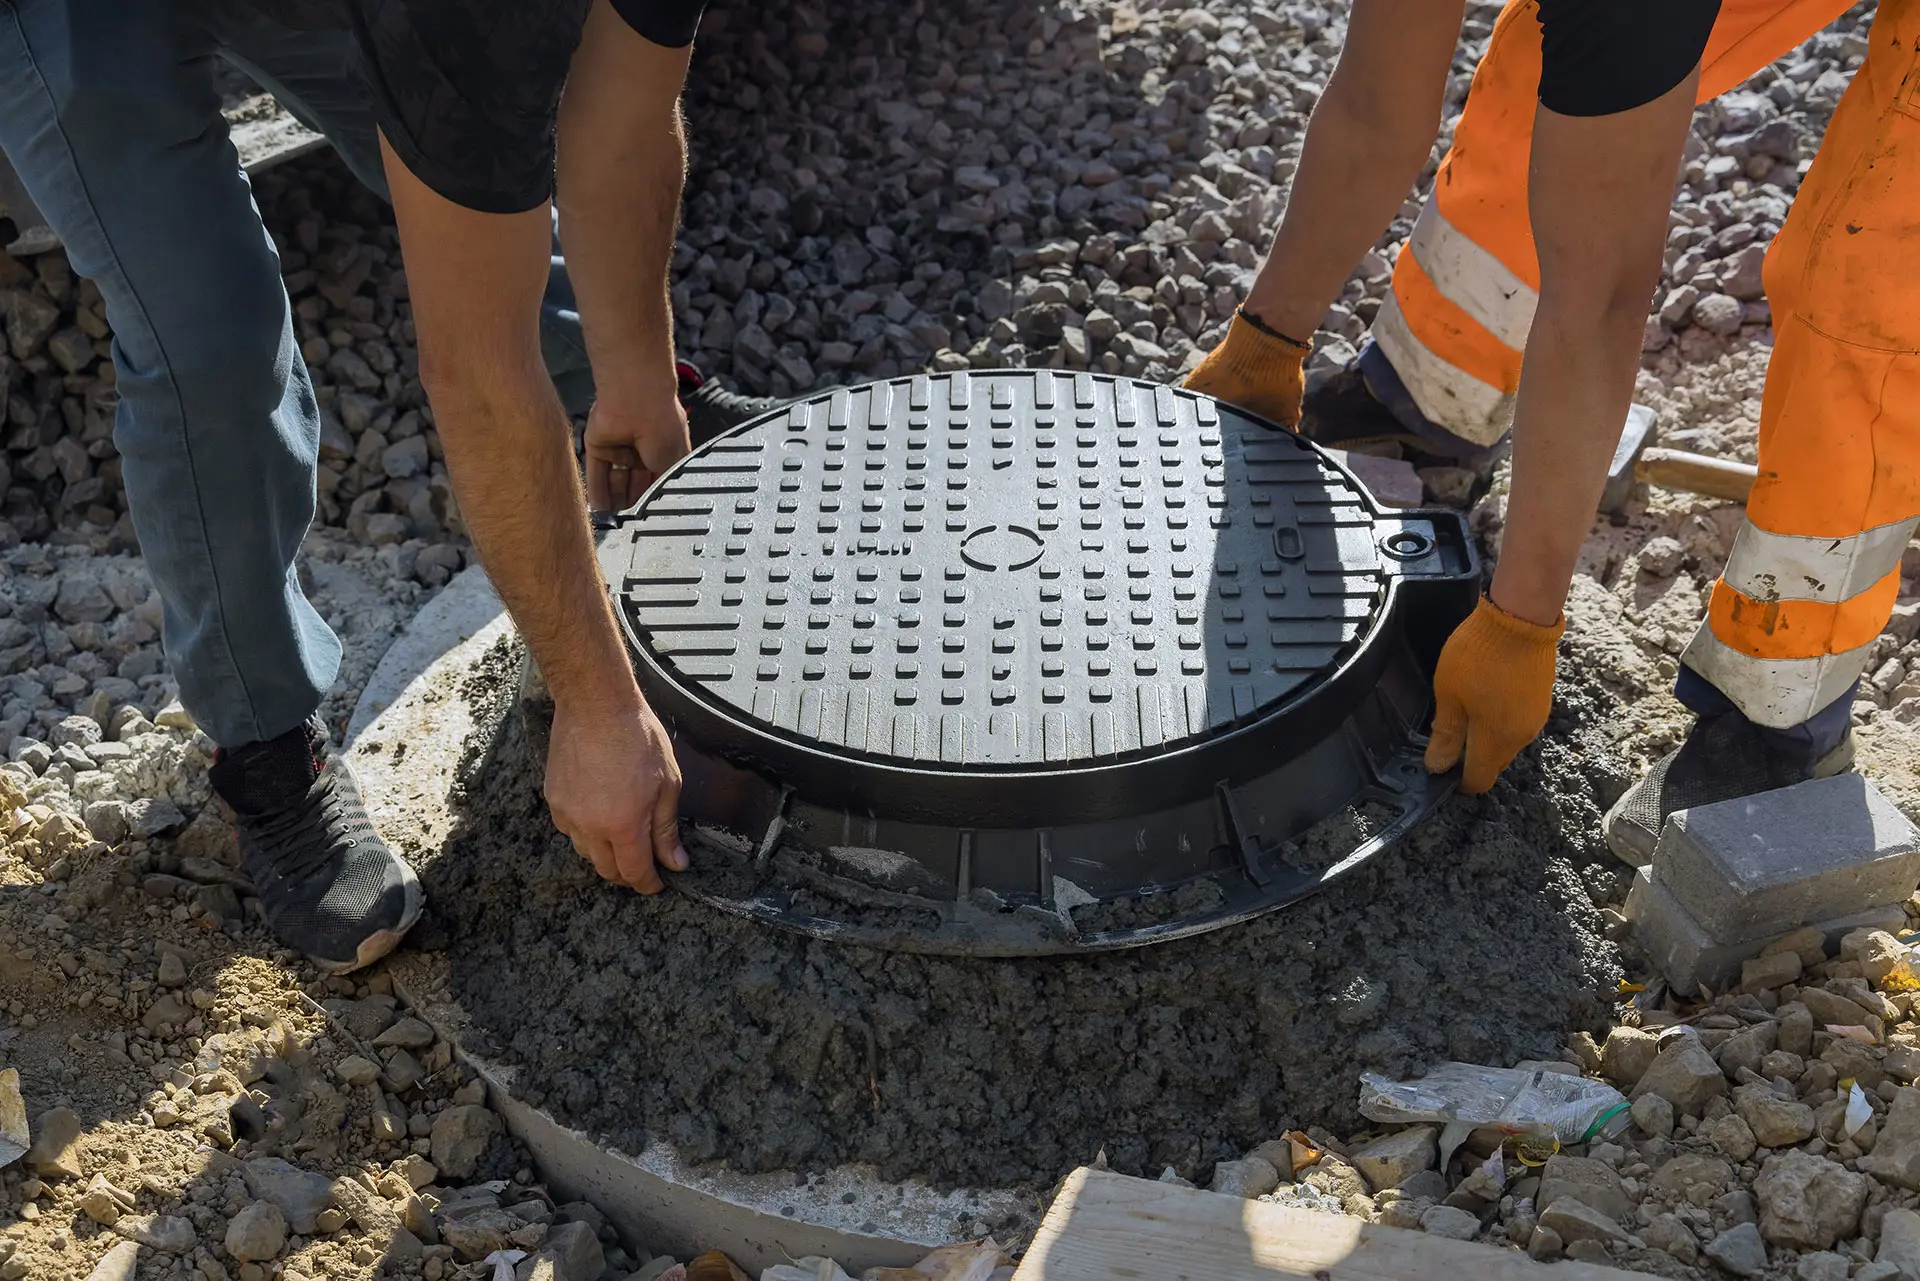 Workers removing a sewer cover